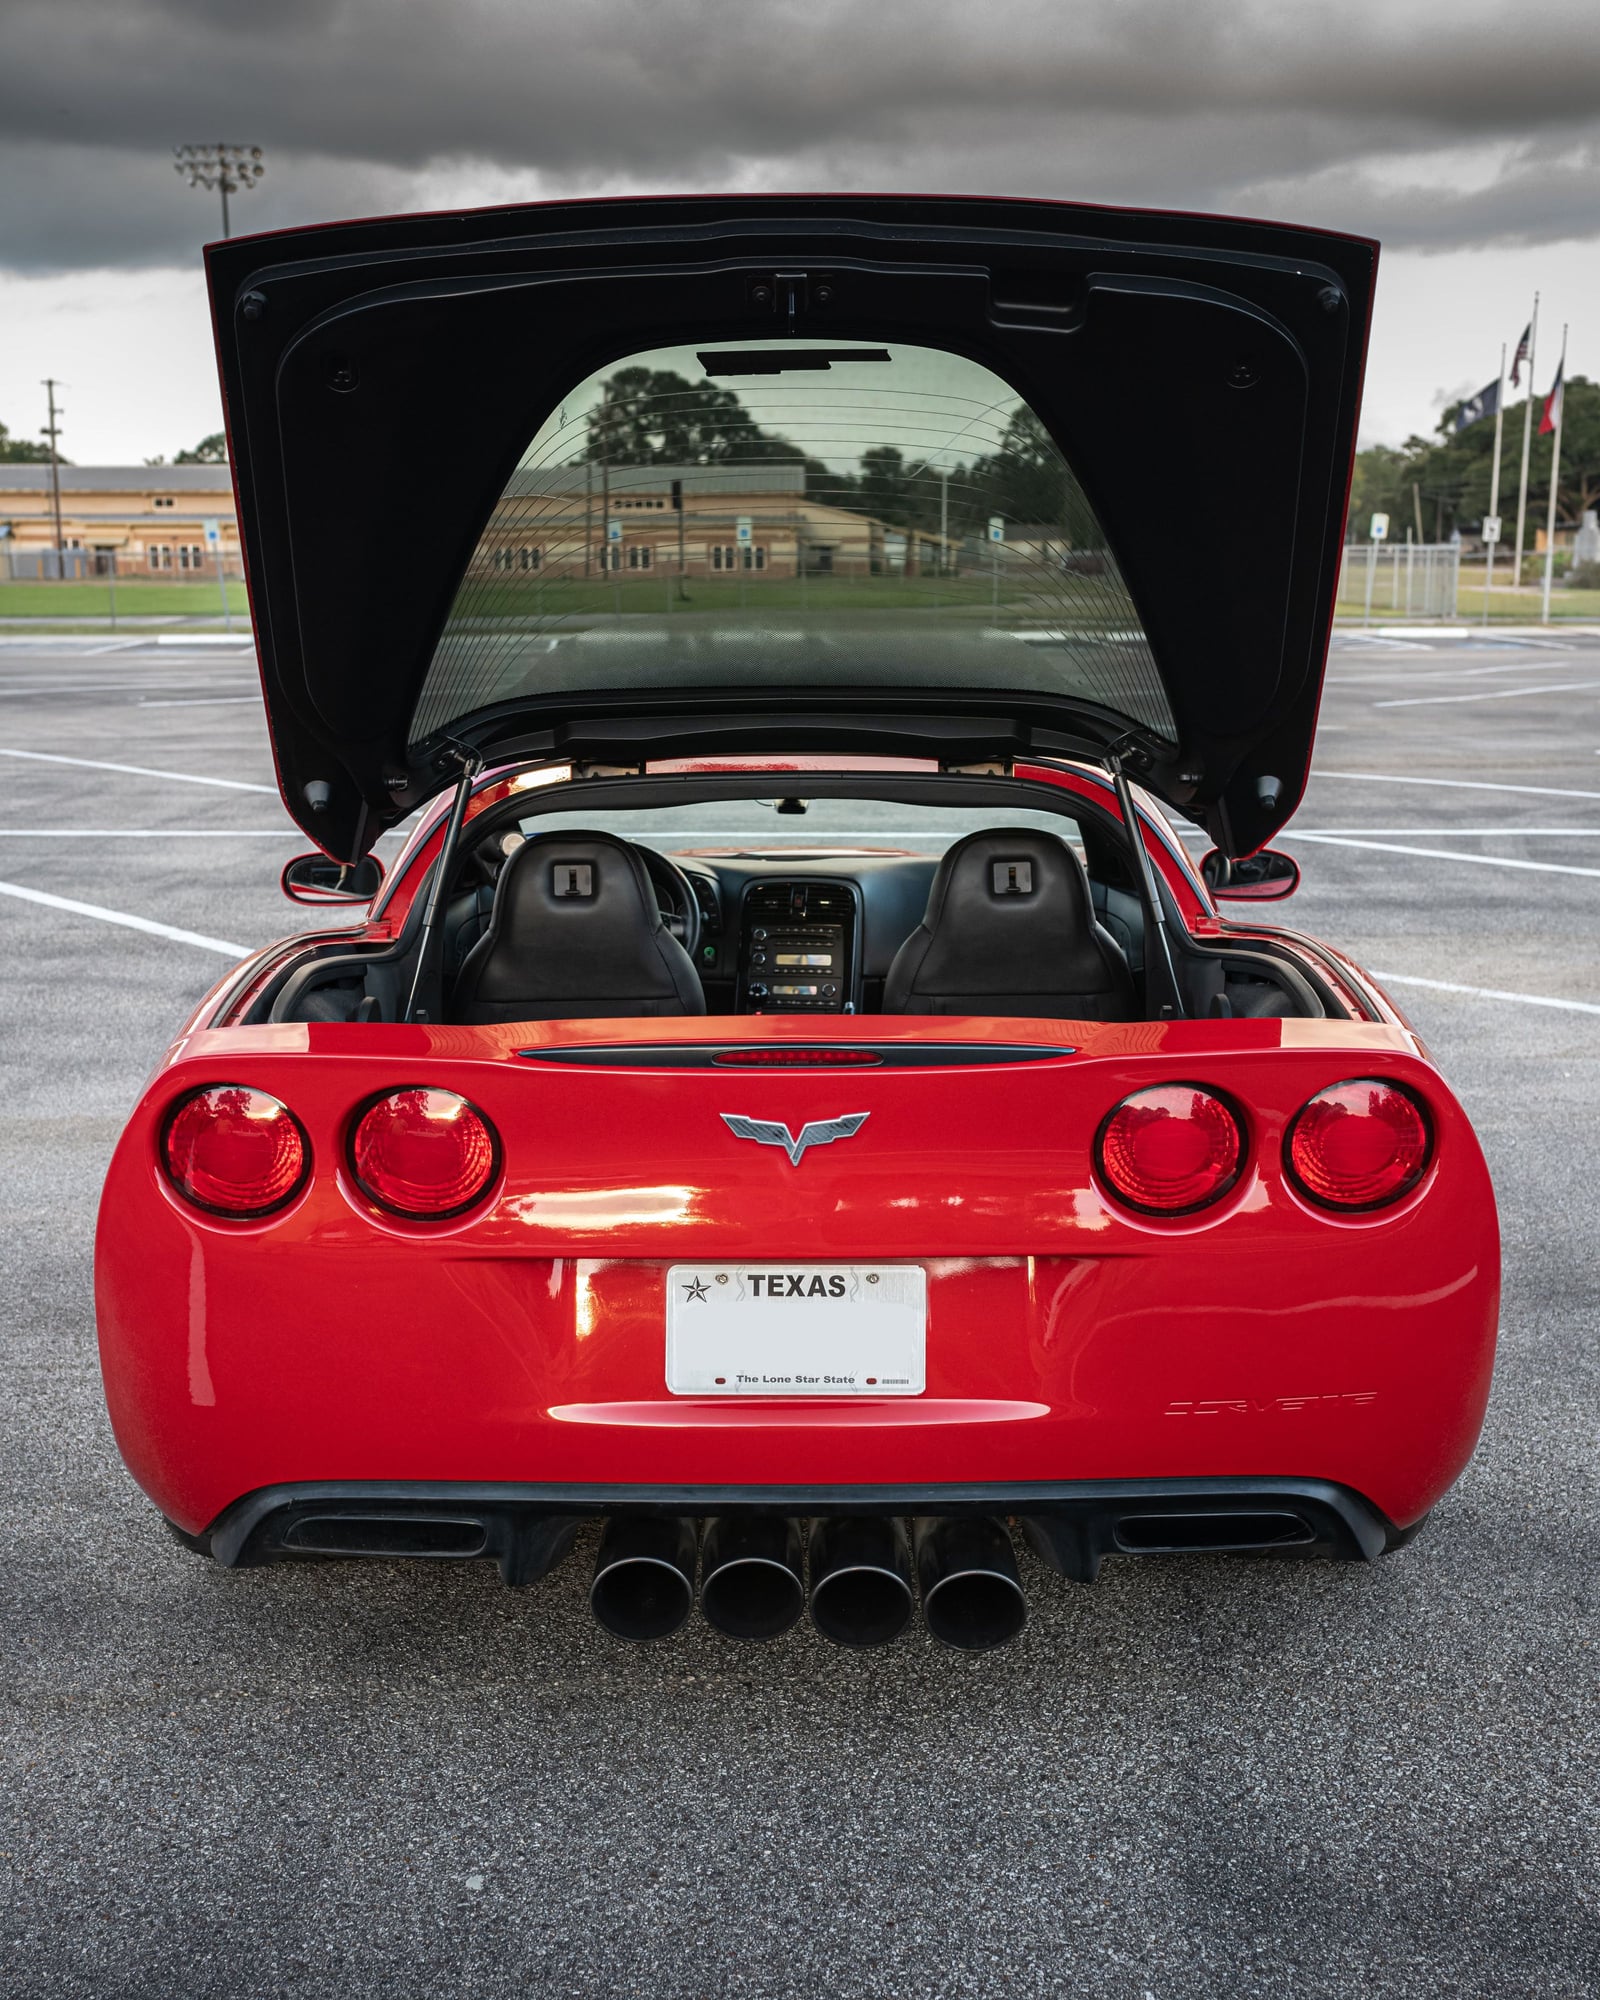 2008 Chevrolet Corvette - FS: 2008 Corvette BASE MT Supercharged/Built Engine 15k Miles - Used - VIN 1G1YY26W885127850 - 15,517 Miles - 8 cyl - 2WD - Manual - Coupe - Red - Liberty, TX 77575, United States